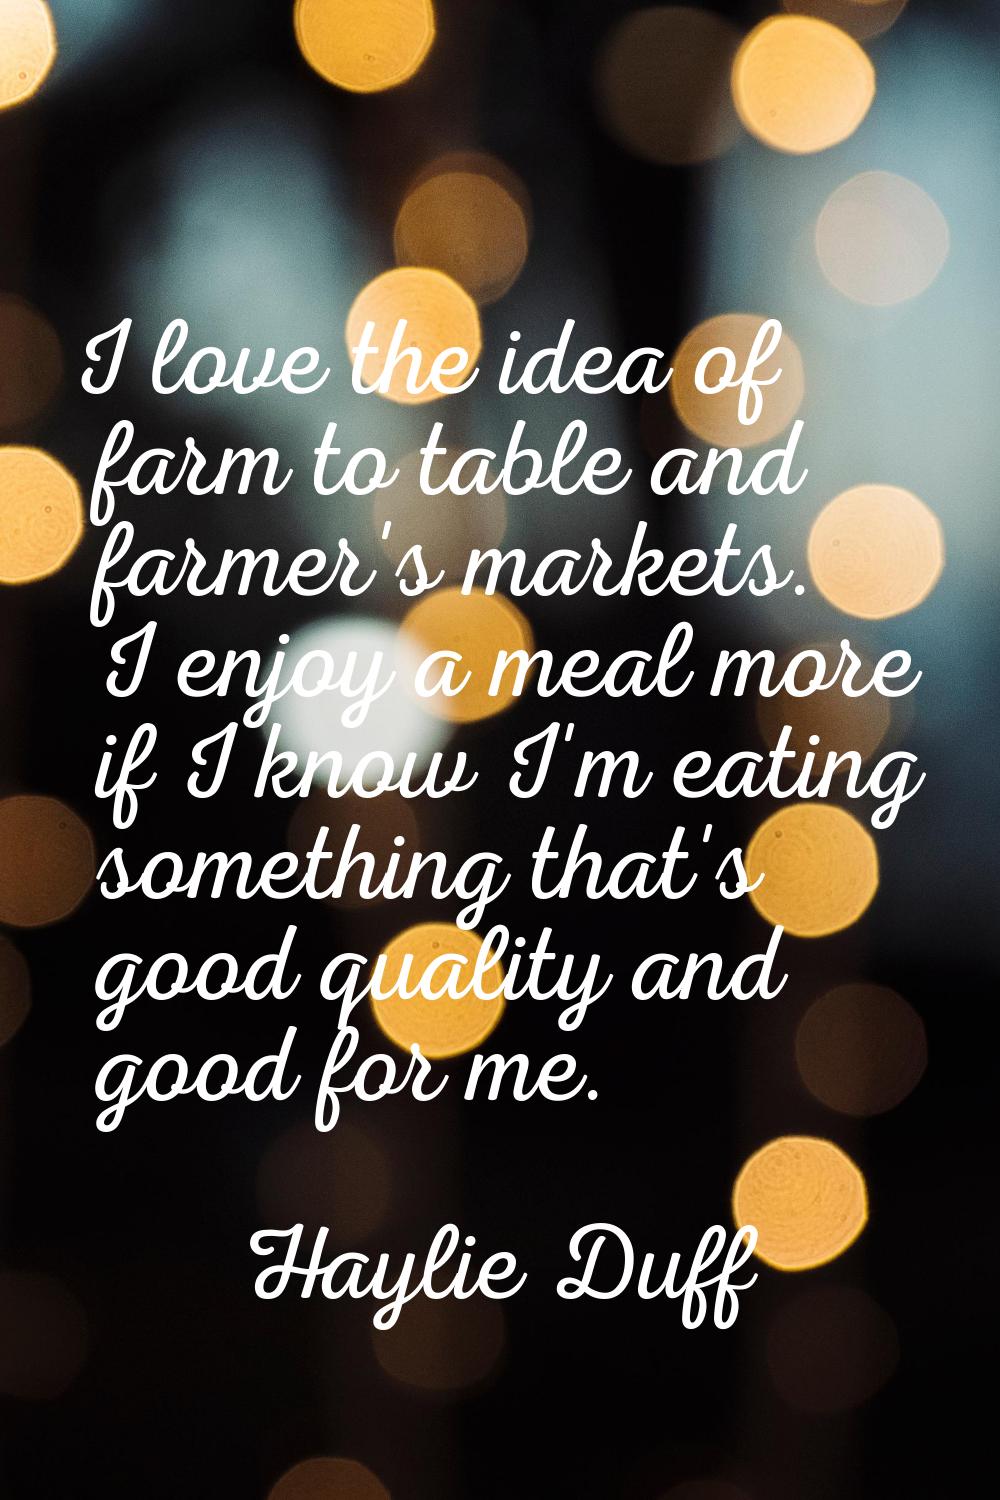 I love the idea of farm to table and farmer's markets. I enjoy a meal more if I know I'm eating som